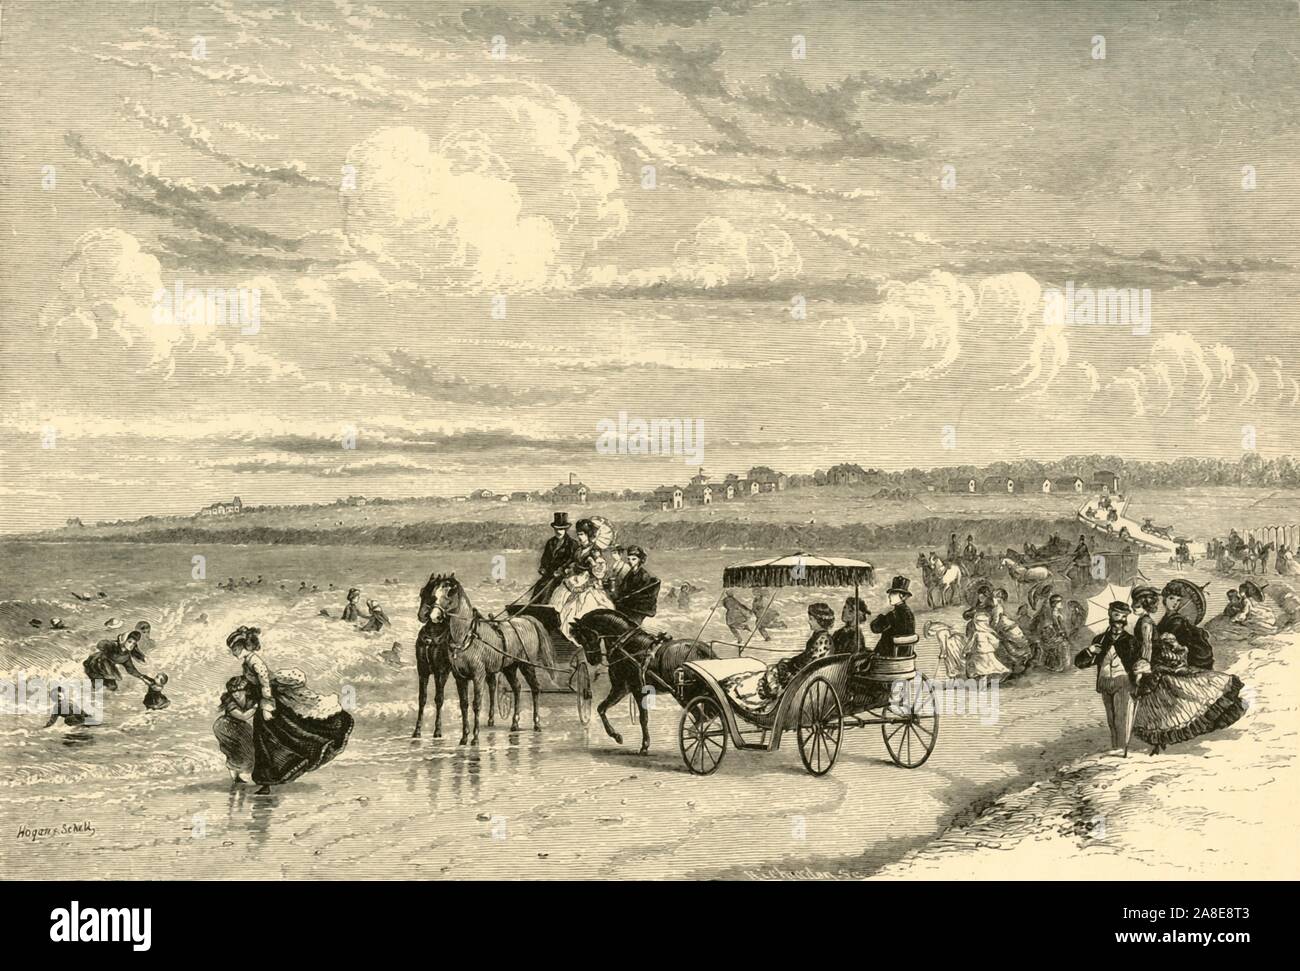 'On the Beach', 1872. People take the air at Newport, Rhode Island, USA. From &quot;Picturesque America; or, The Land We Live In, A Delineation by Pen and Pencil of the Mountains, Rivers, Lakes...with Illustrations on Steel and Wood by Eminent American Artists&quot; Vol. I, edited by William Cullen Bryant. [D. Appleton and Company, New York, 1872] Stock Photo